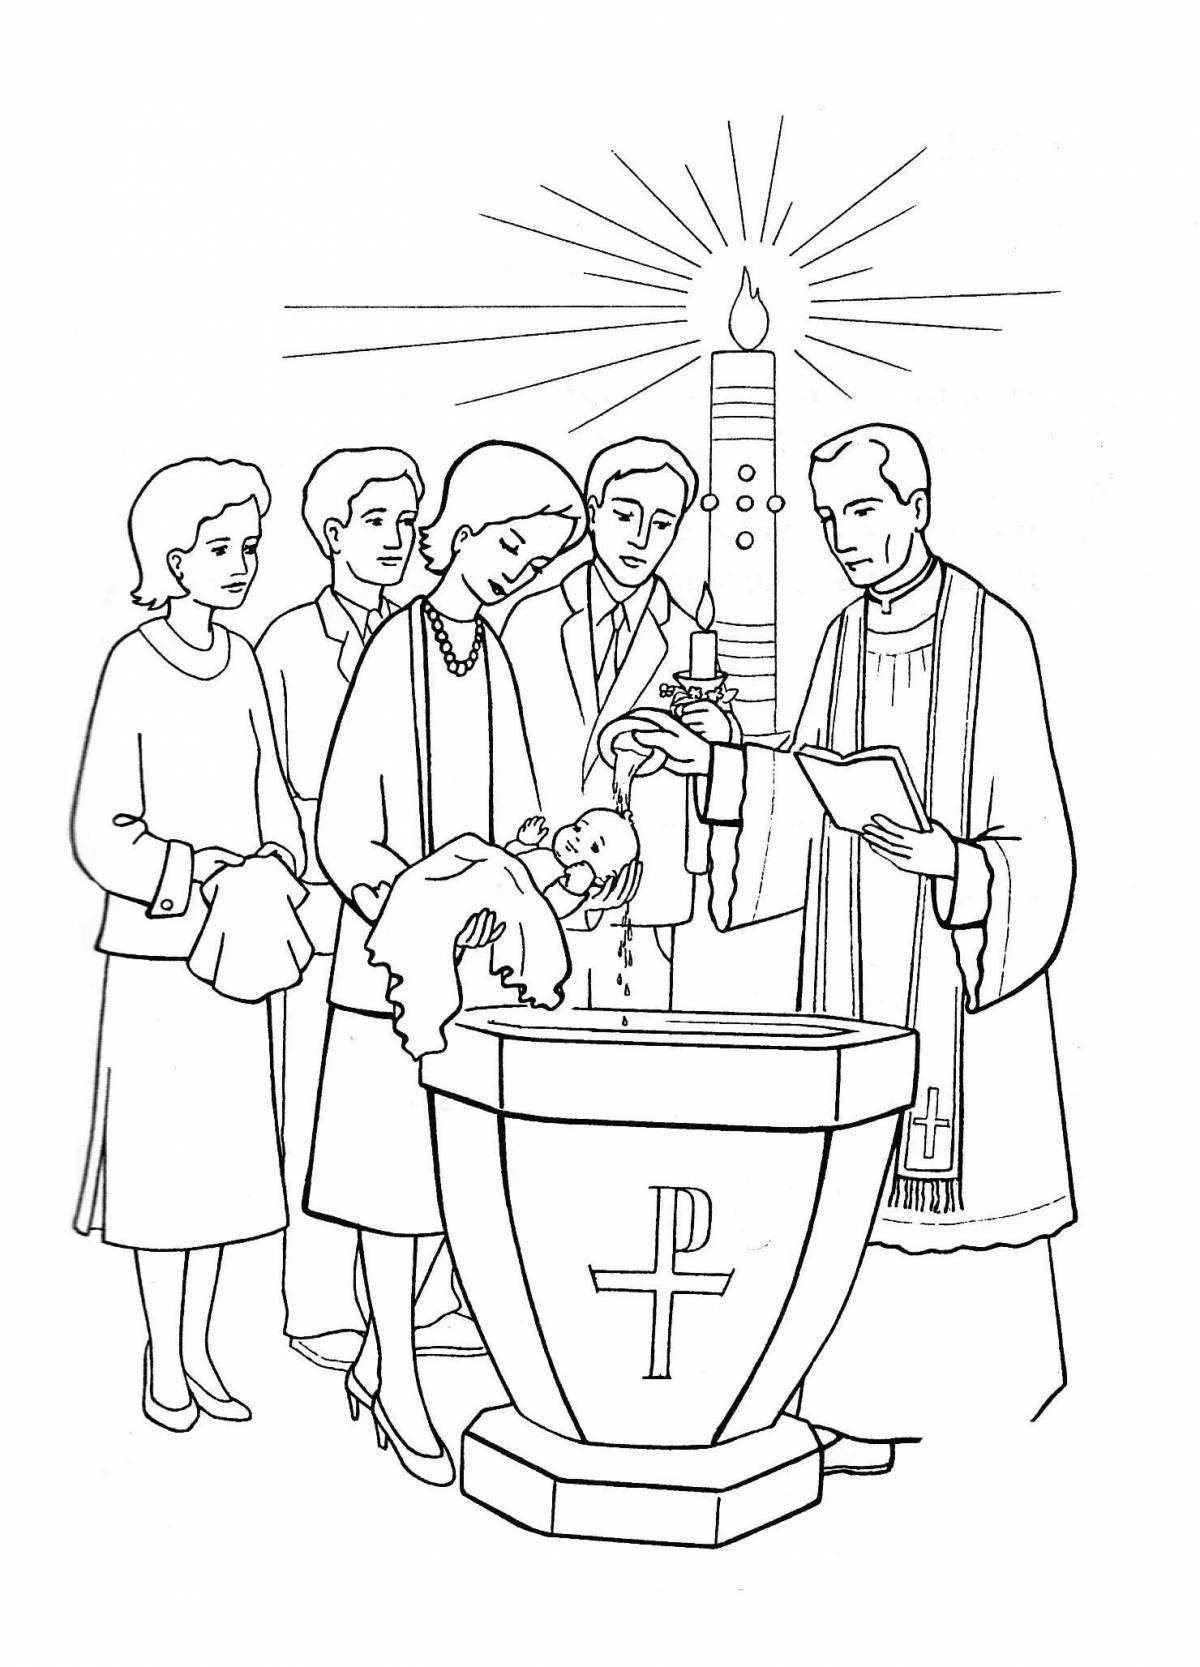 Charming baptism coloring book for orthodox children